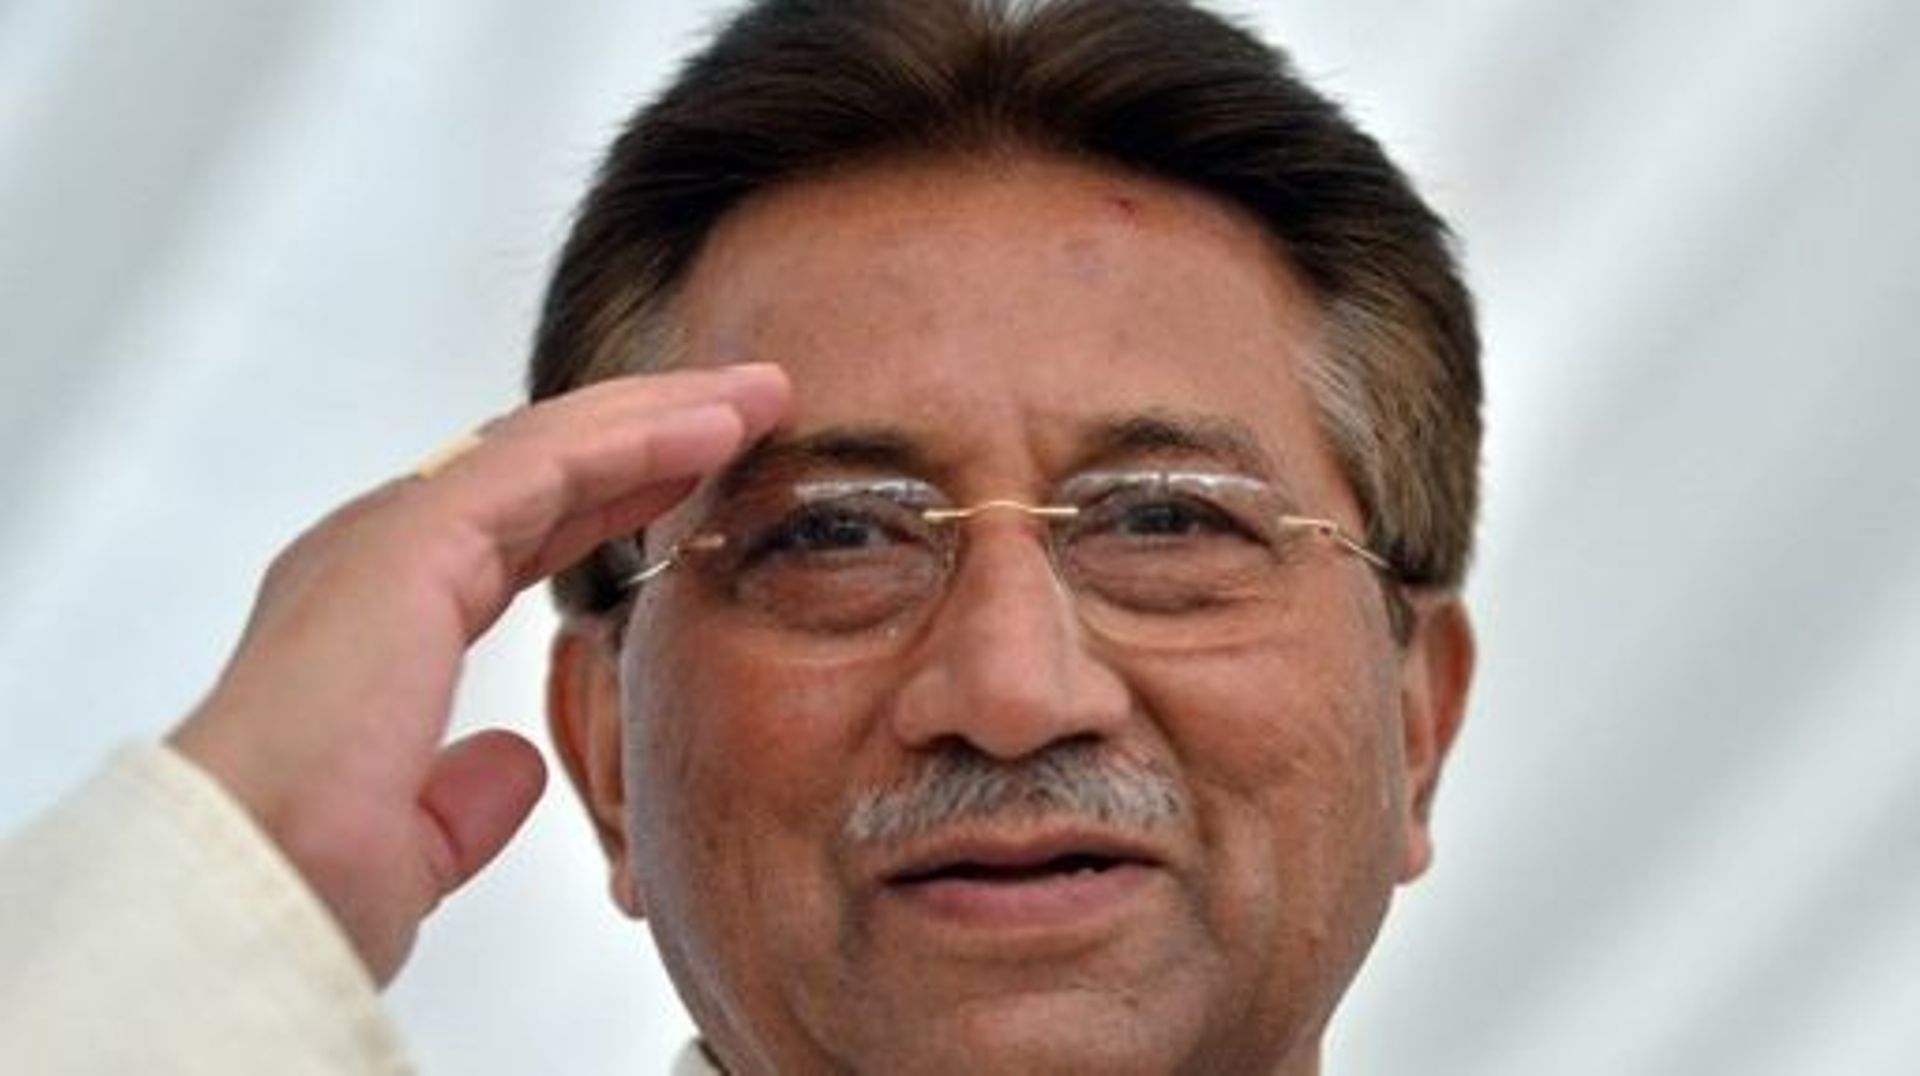 (FILES) In this file photo taken on April 15, 2013 Pakistan's former president Pervez Musharraf salutes as he arrives to unveil his party manifesto for the forthcoming general election at his residence in Islamabad. Pakistan's former military ruler Pervez